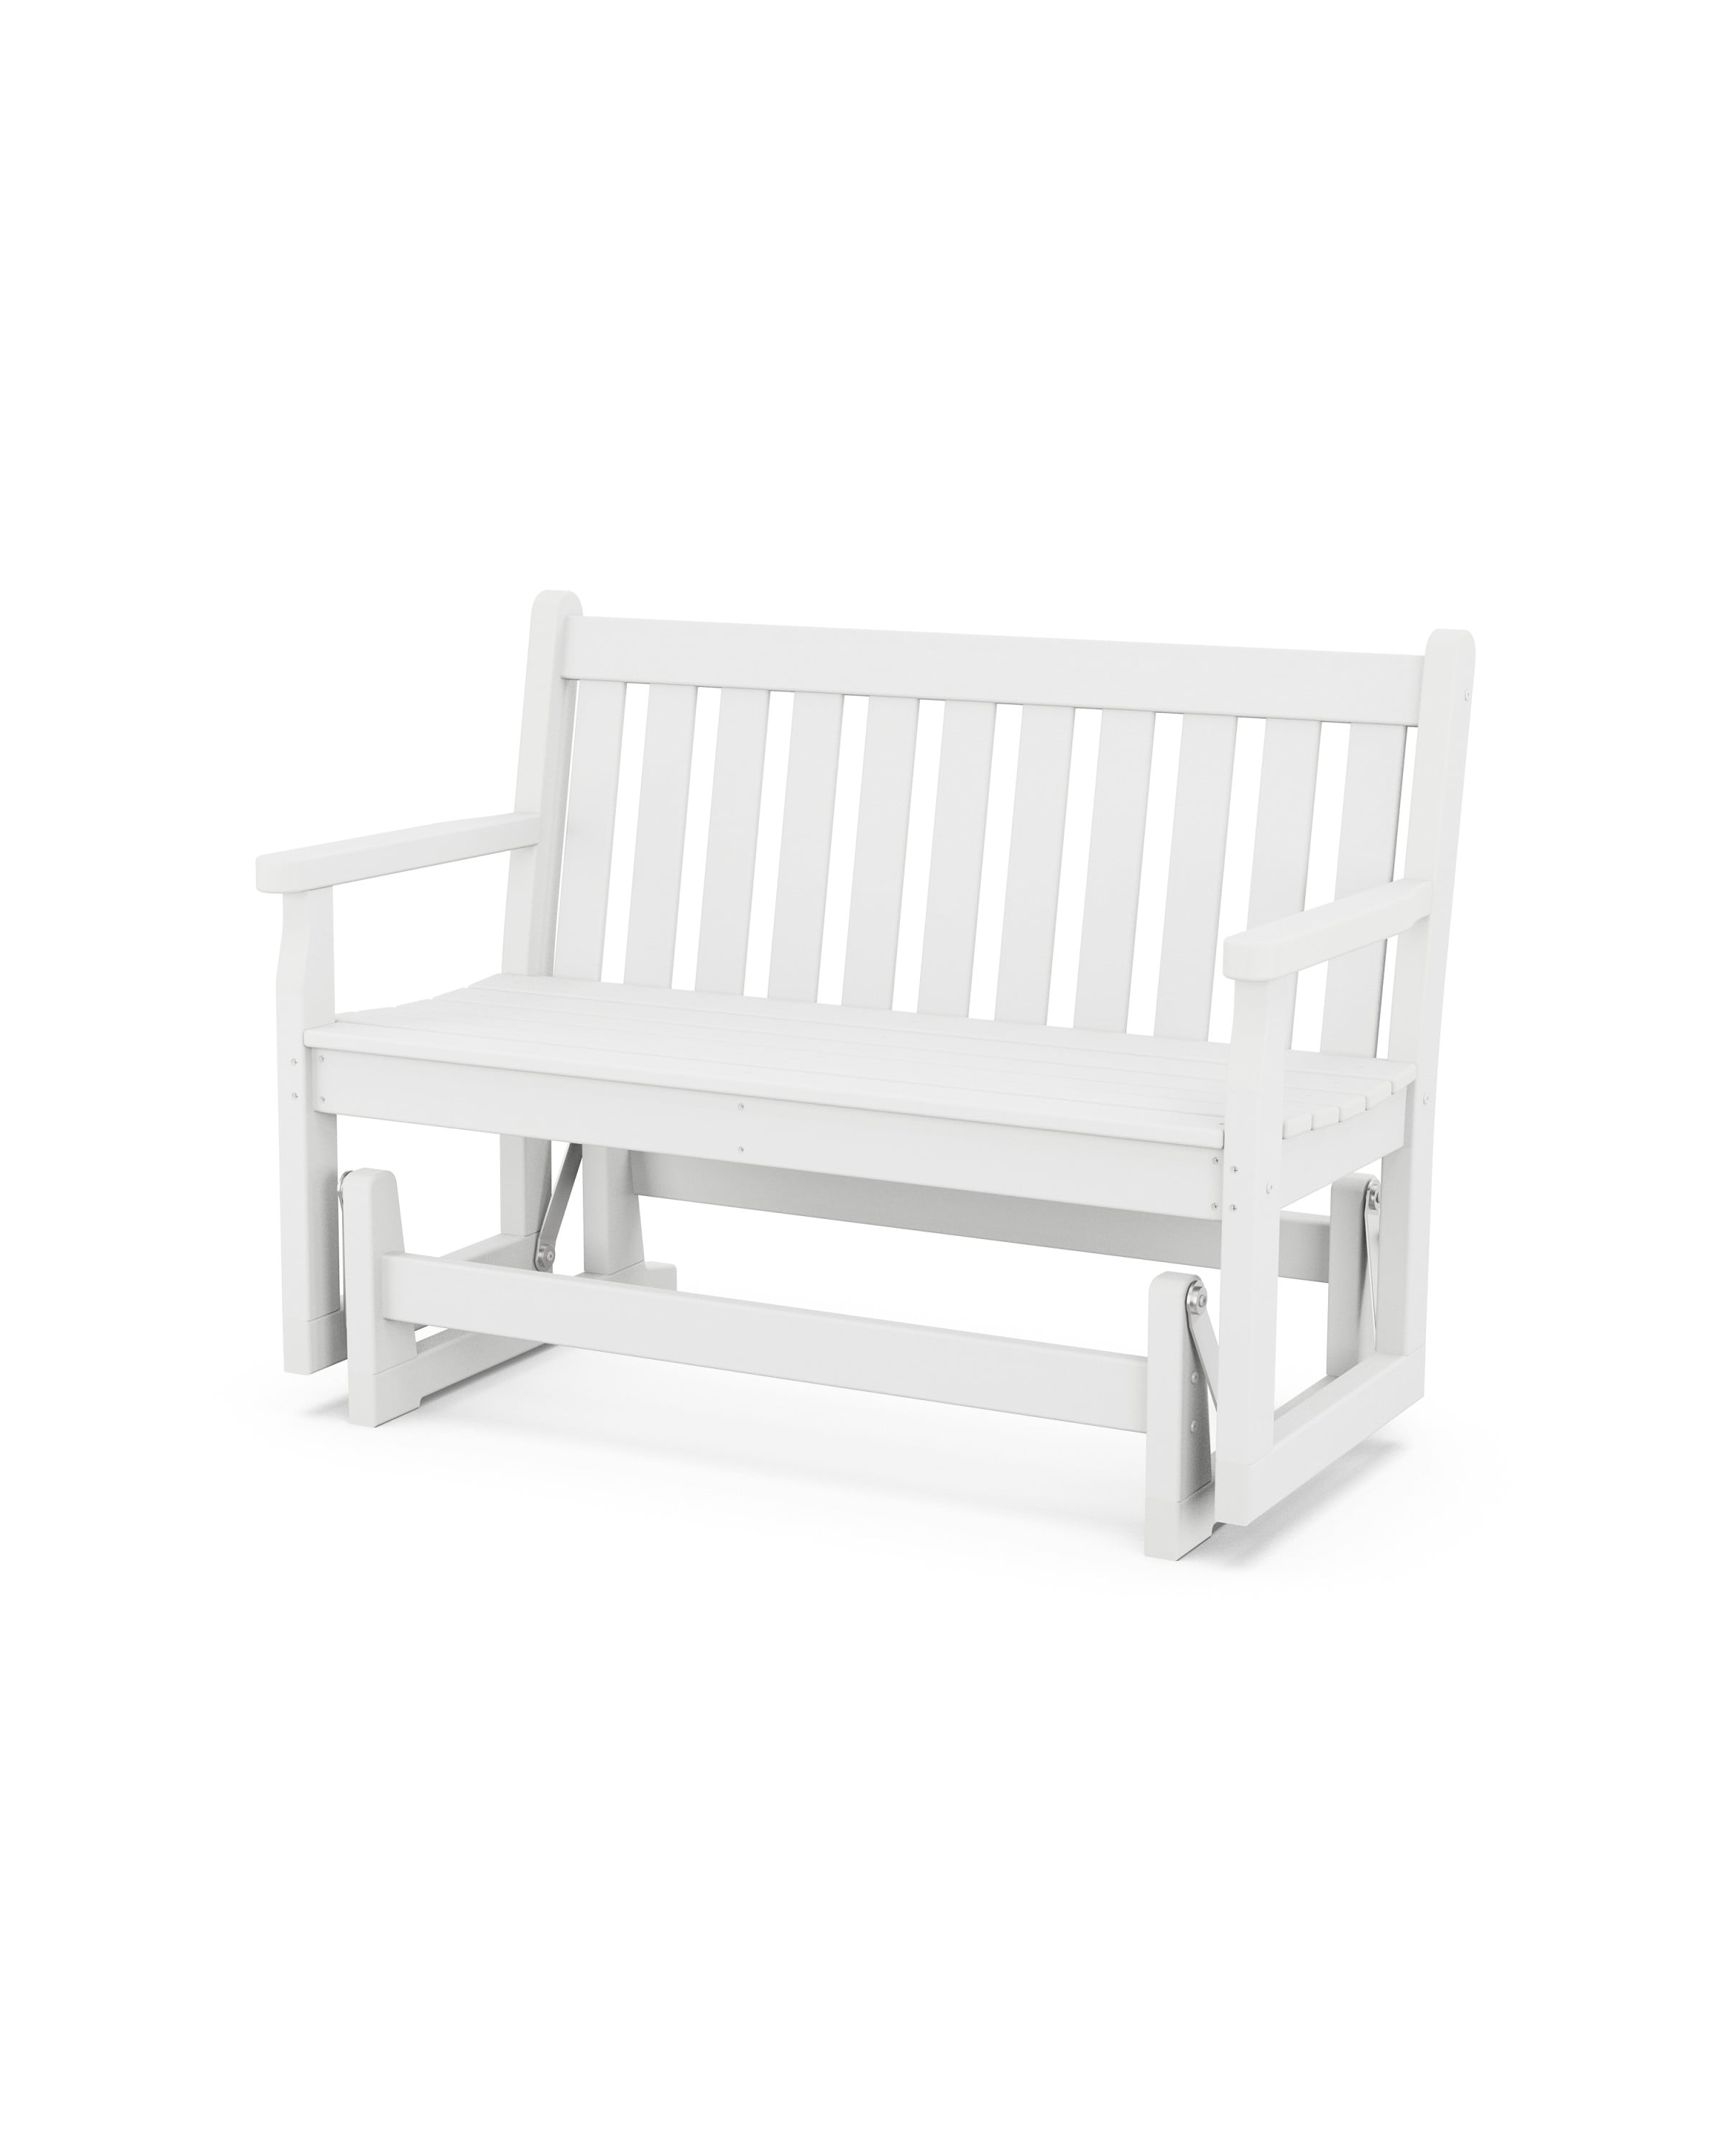 Traditional Garden 47.5-in W x 34-in H White Plastic Traditional Bench | - POLYWOOD TGG48WH